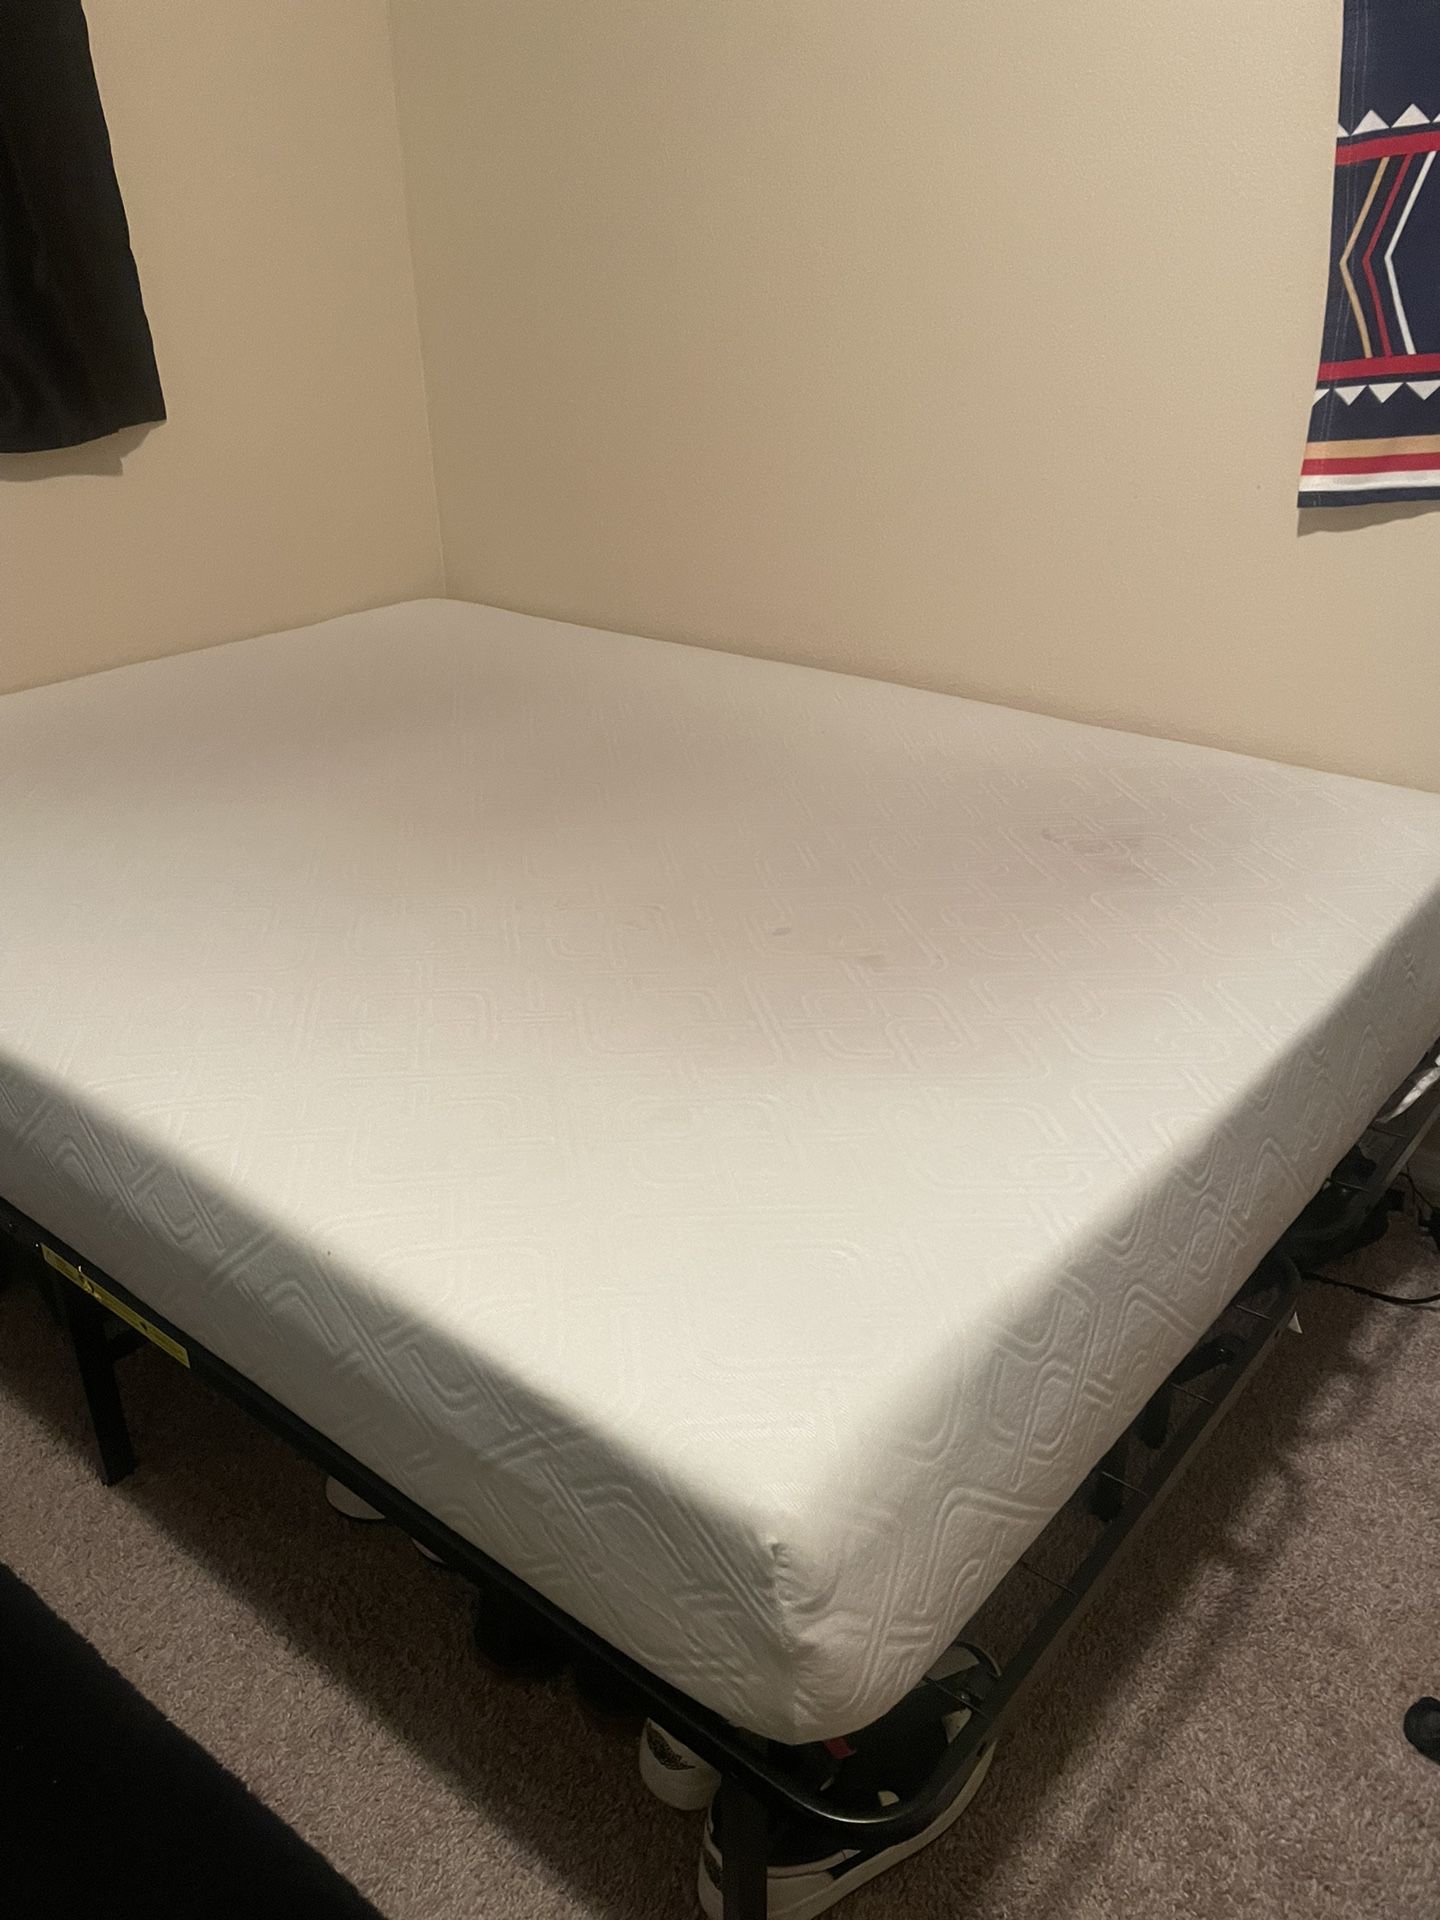 Used Mattress And Bed Frame (260 Original Price)